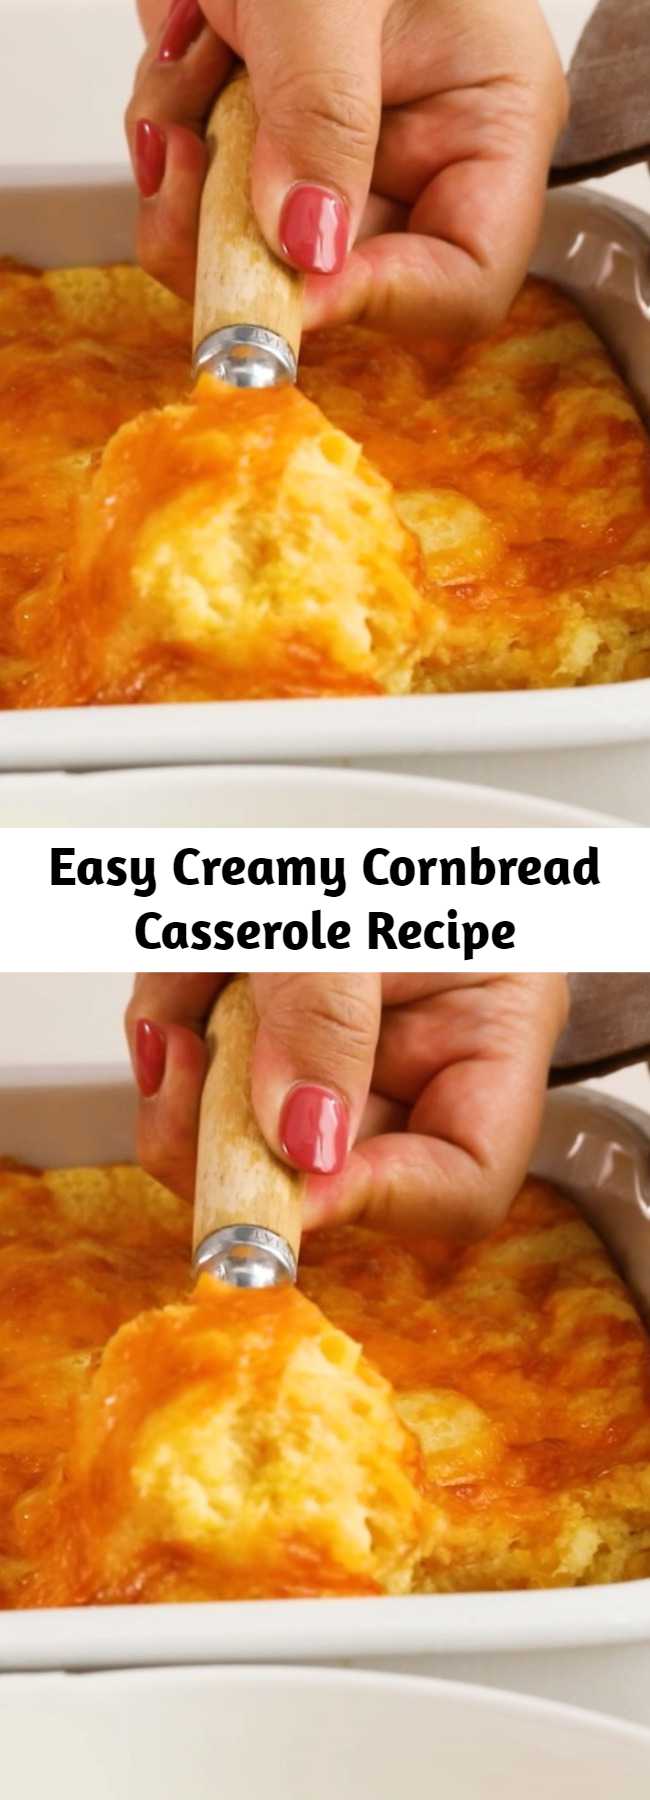 Easy Creamy Cornbread Casserole Recipe - This was amazing! First time I made it turned out perfectly, and was devoured within a half hour at a family gathering. Great for picky kids or adults.